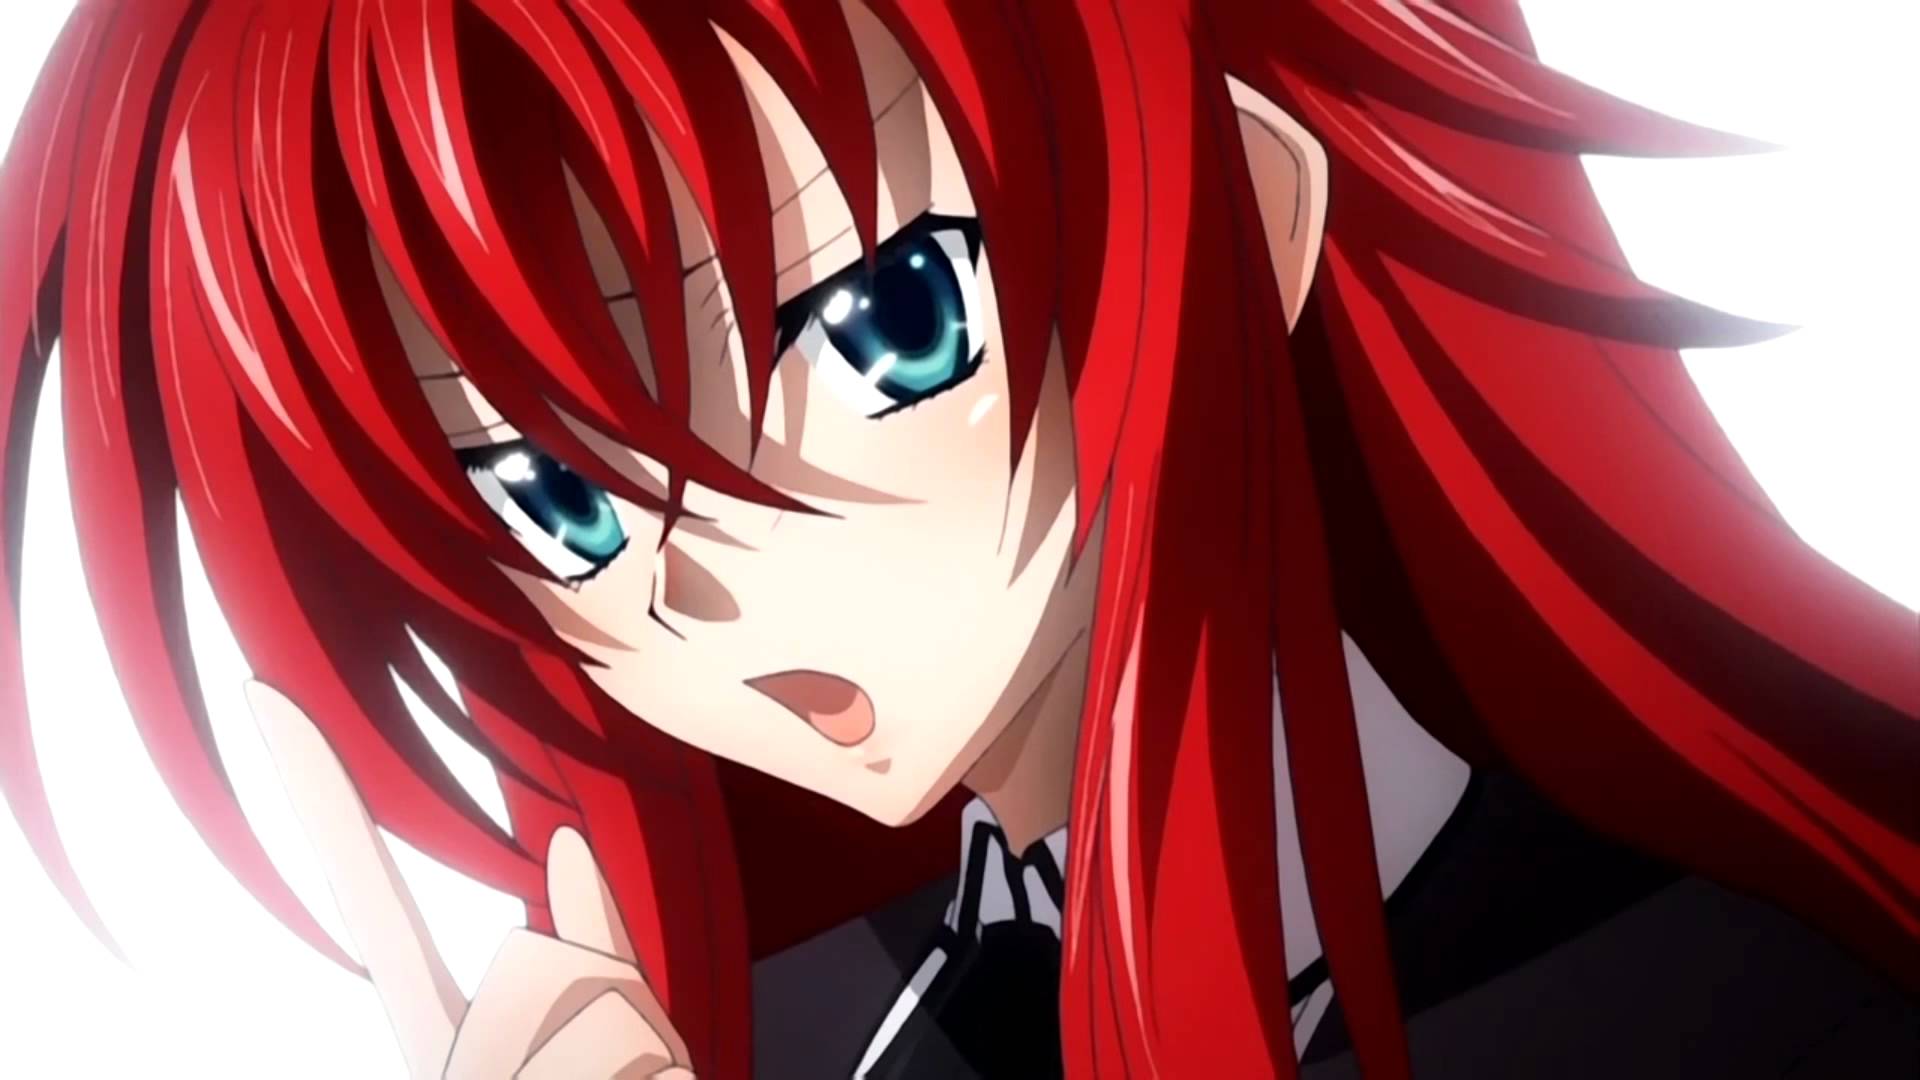  Rias  Gremory  Wallpapers Wallpaper Cave